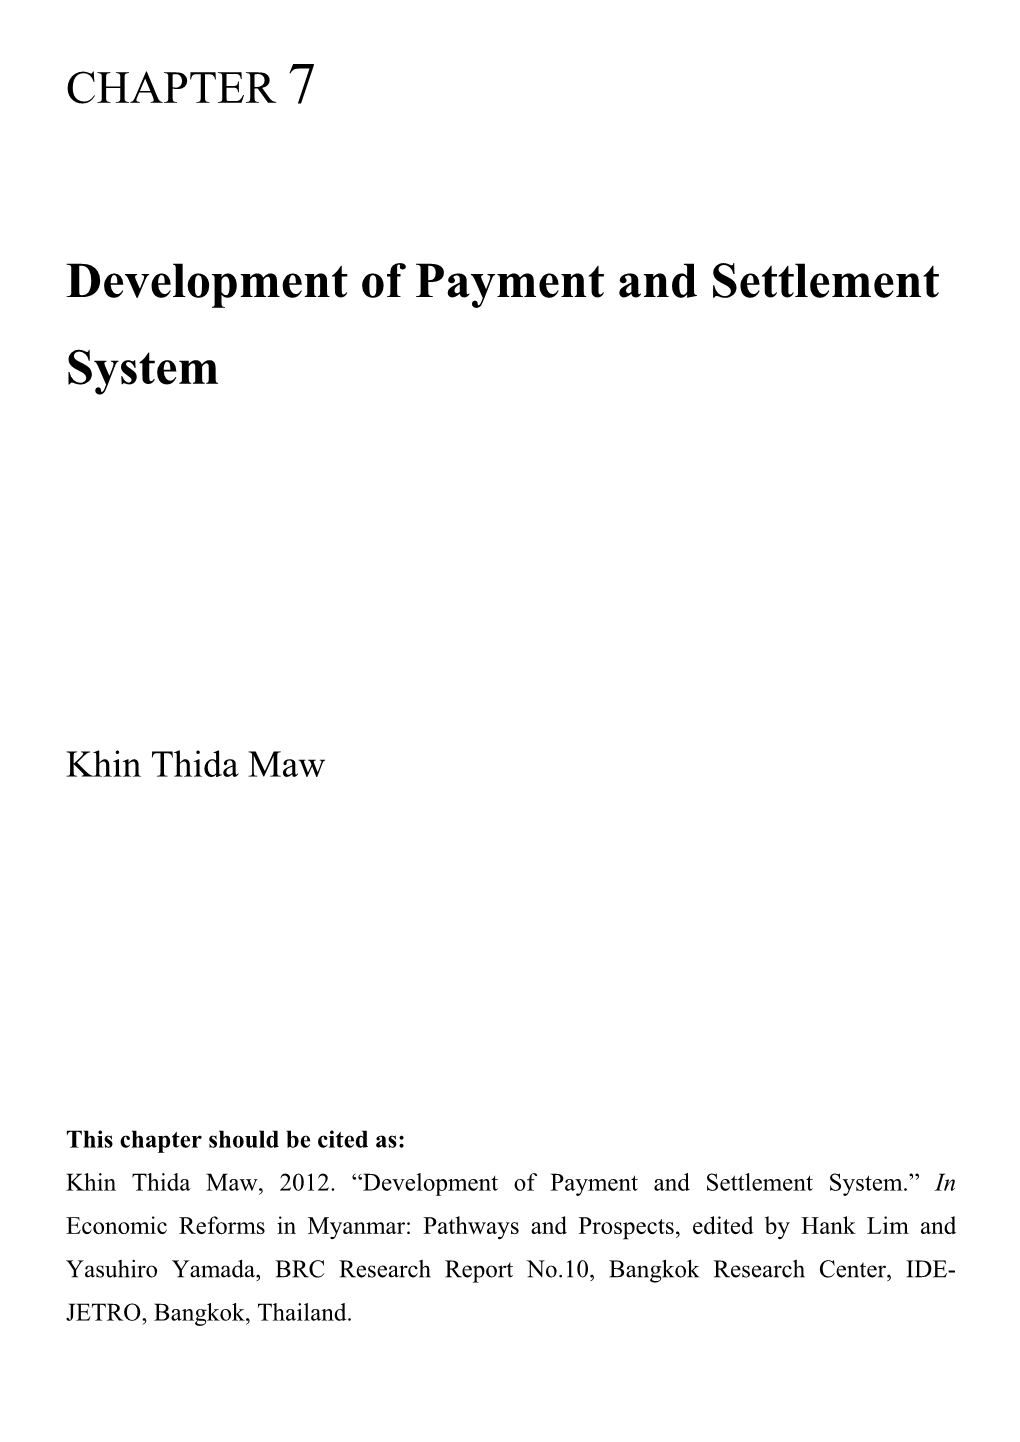 Development of Payment and Settlement System